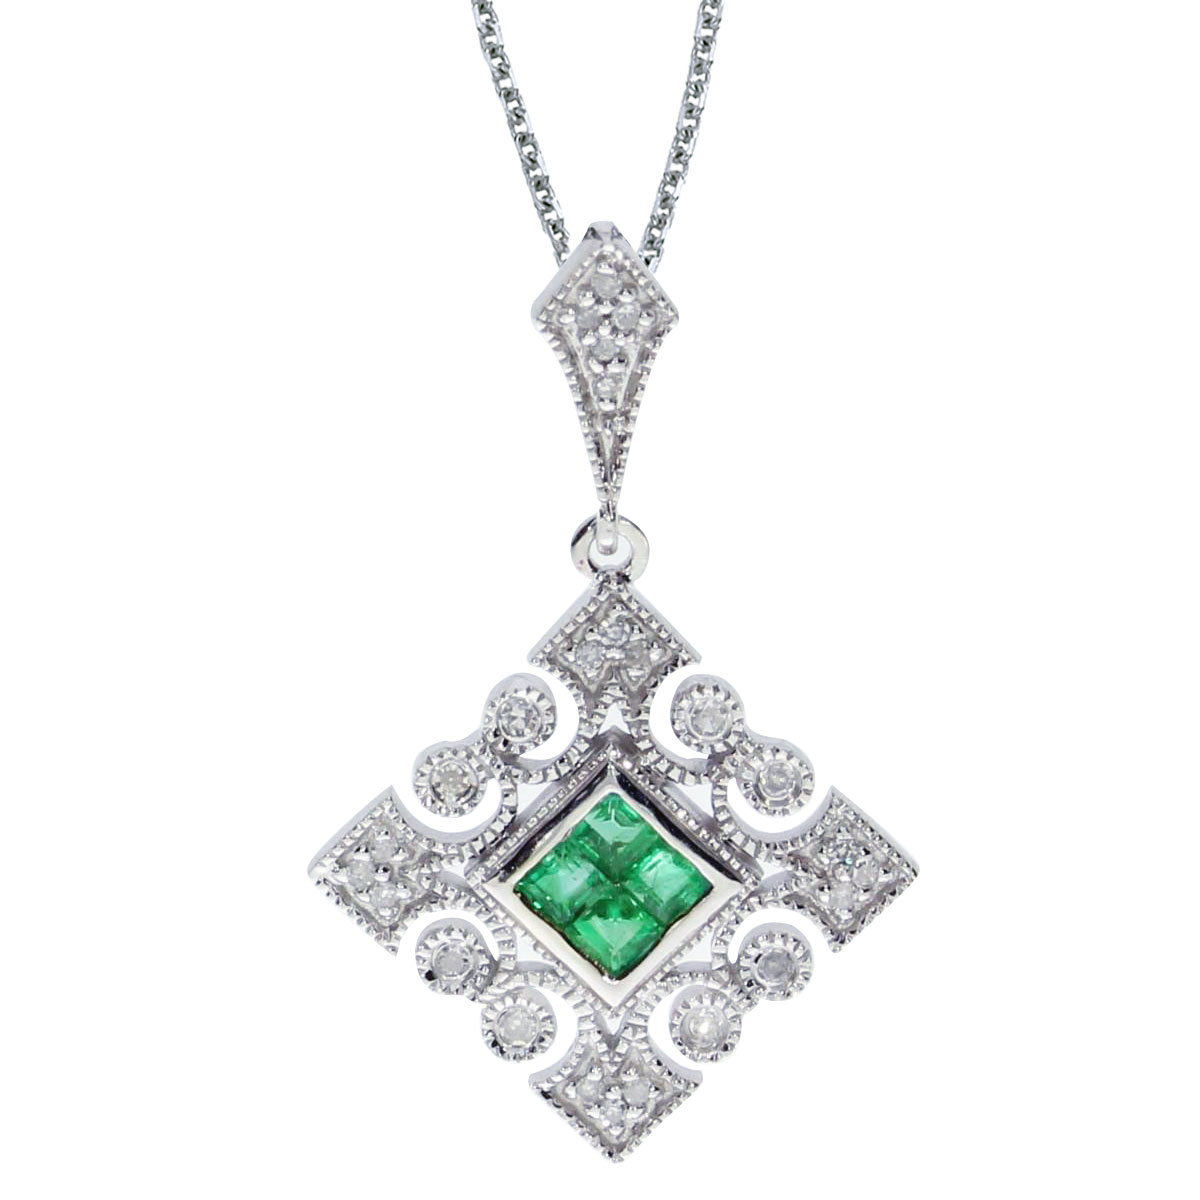 This 14k white gold filigree shape pendant contains four 2 mm emeralds surrounded by .10 carats o...